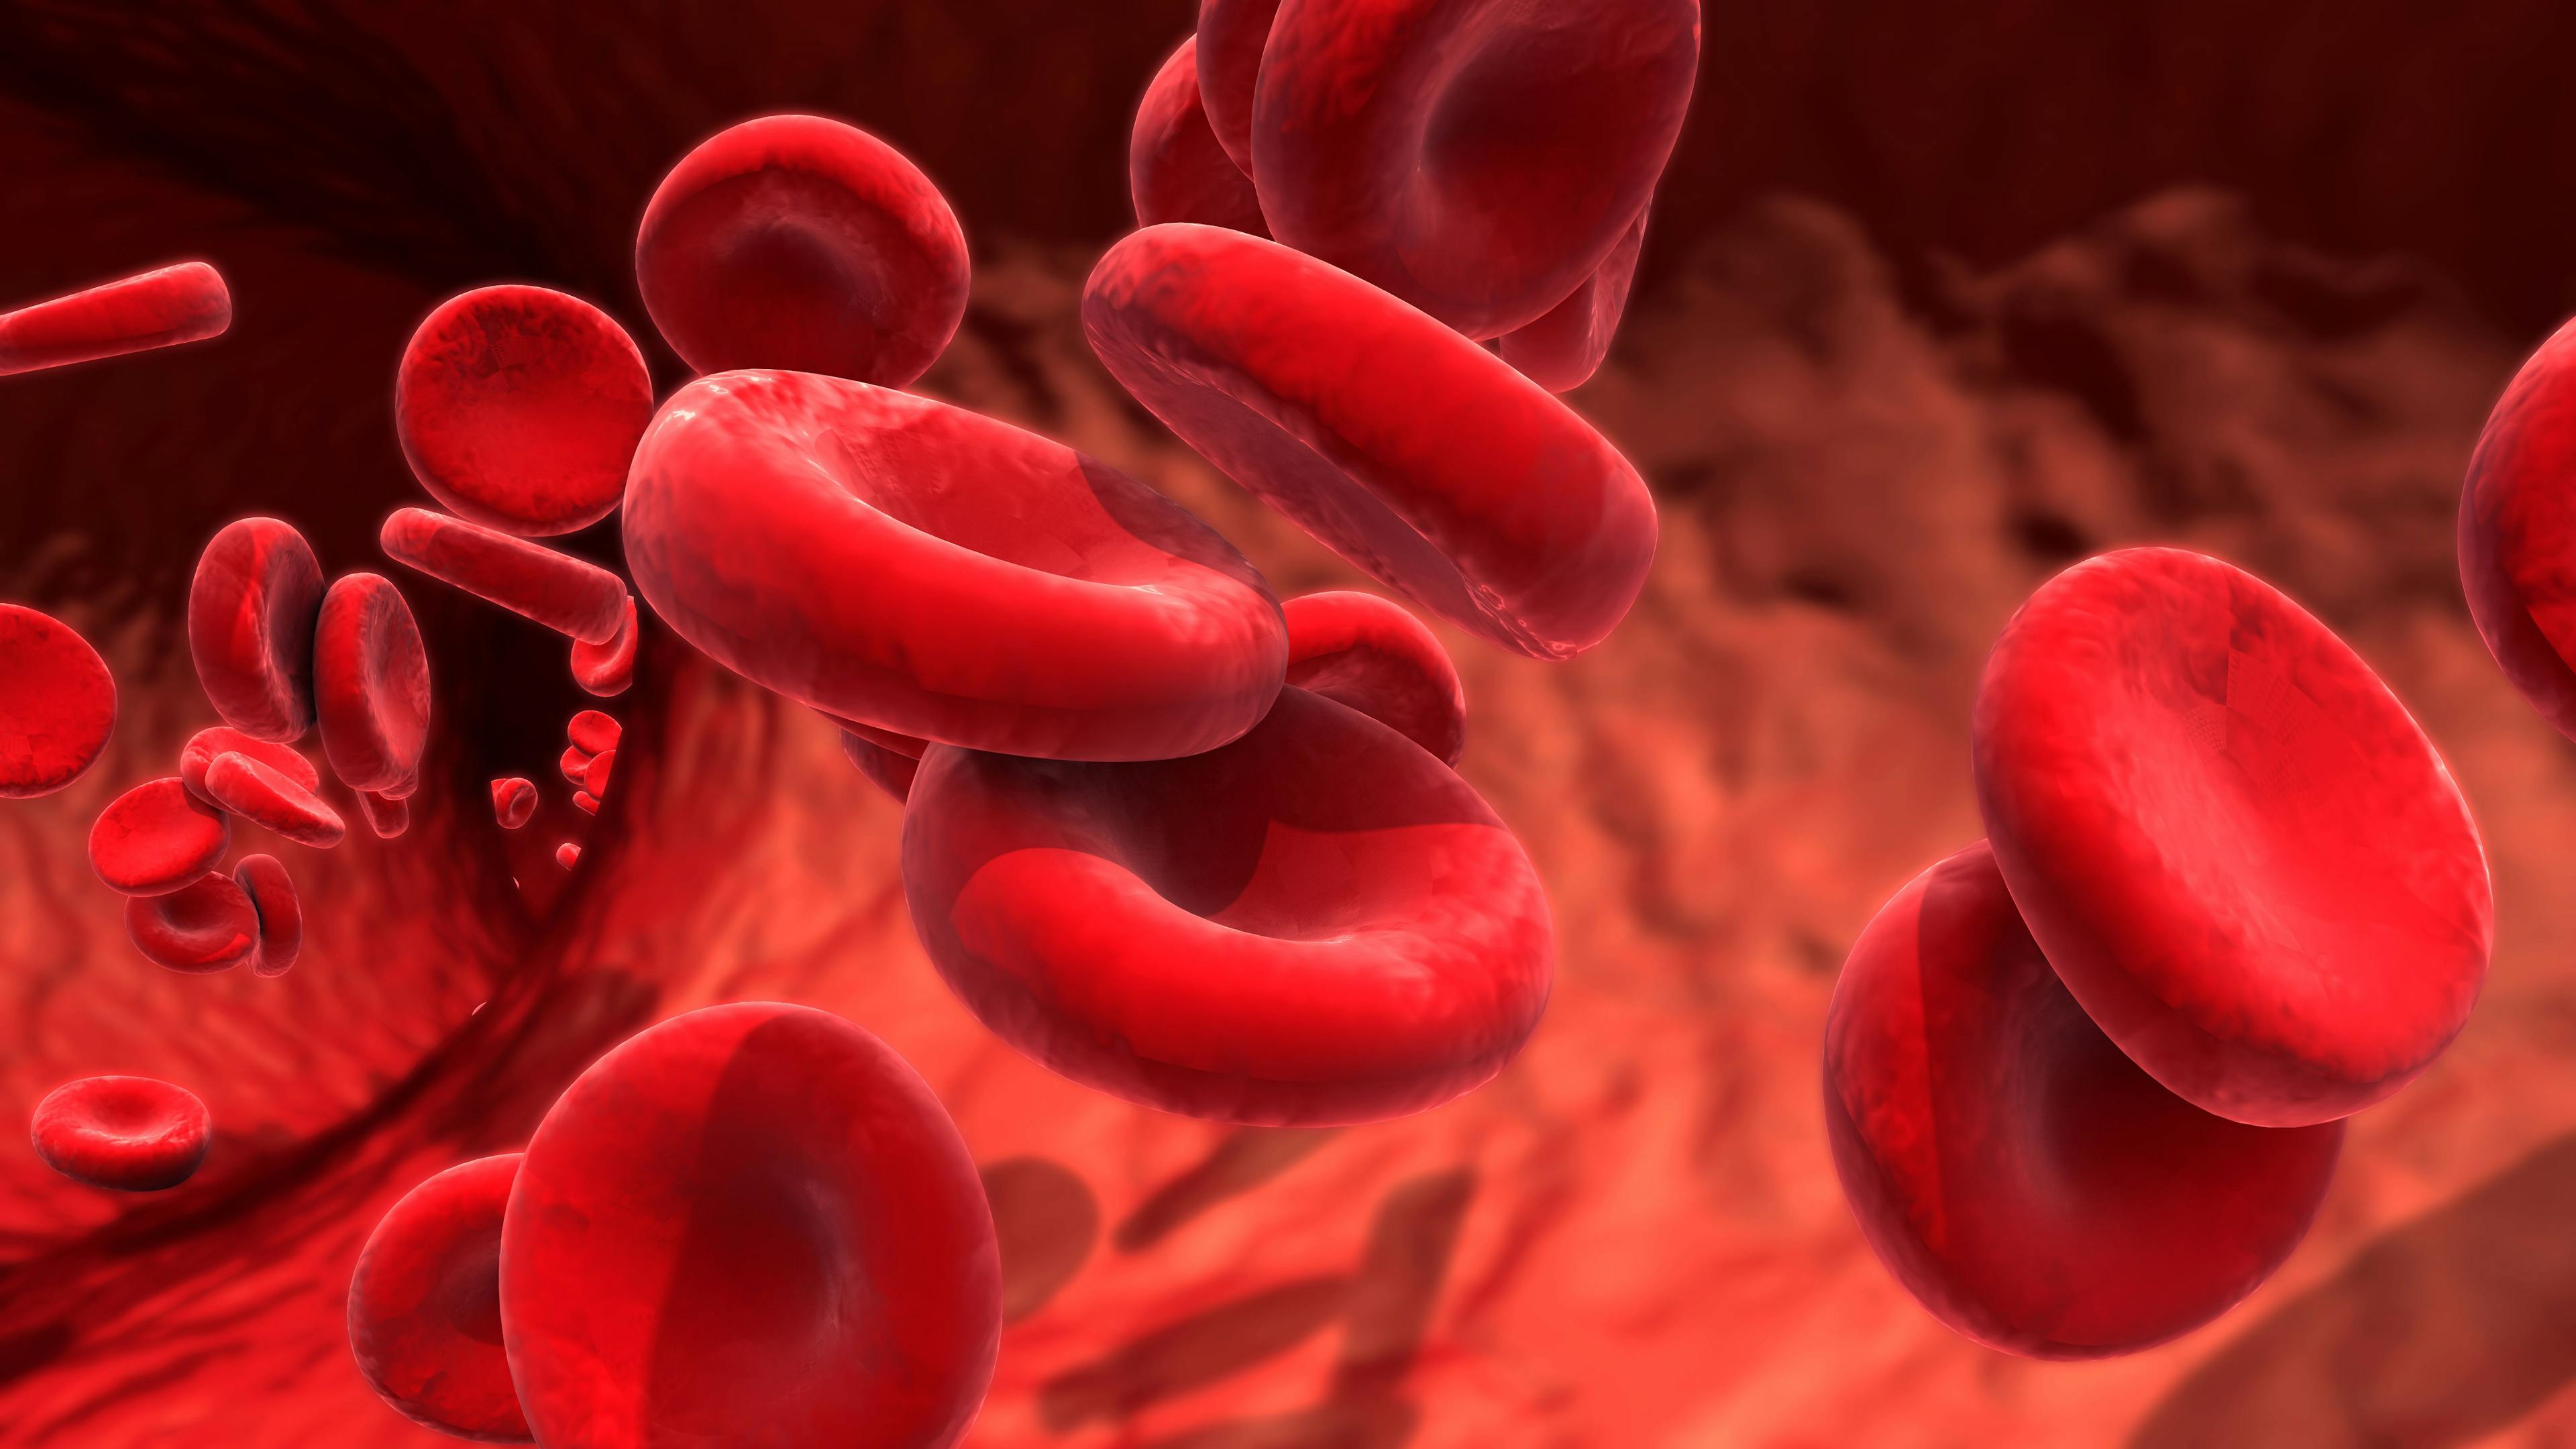 Red blood cells circulating in the blood vessels | Image credit: Design Cells - stock.adobe.com